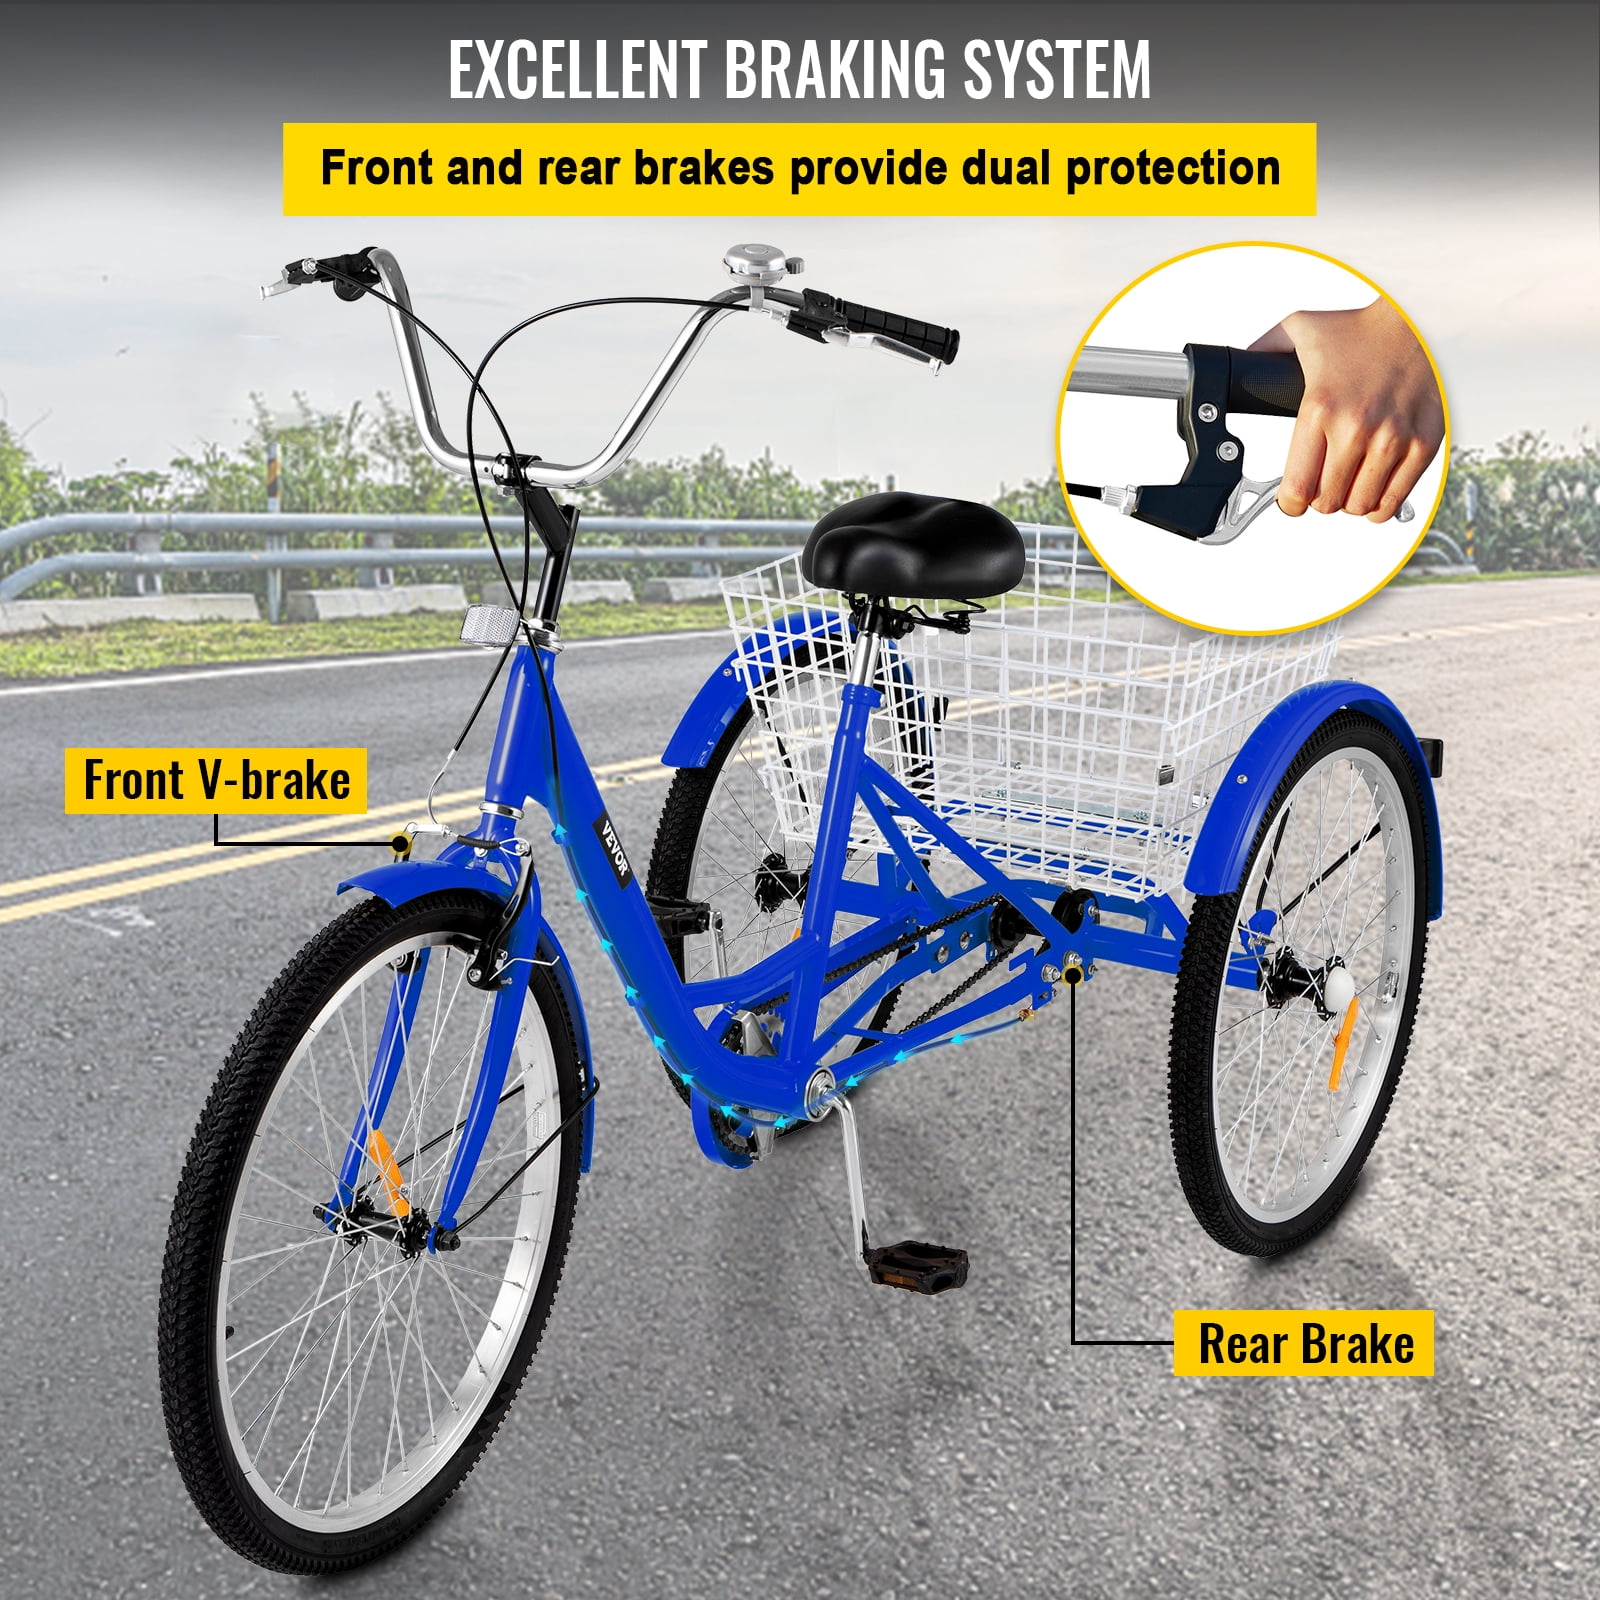 Foldable 3 Wheeled Bicycle with Large Size Basket Backrest Seat VANELL 20“ 7 Speed Tricycle Adult Trike Cruise Bike for Women Men for Shopping Exercise Recreation 